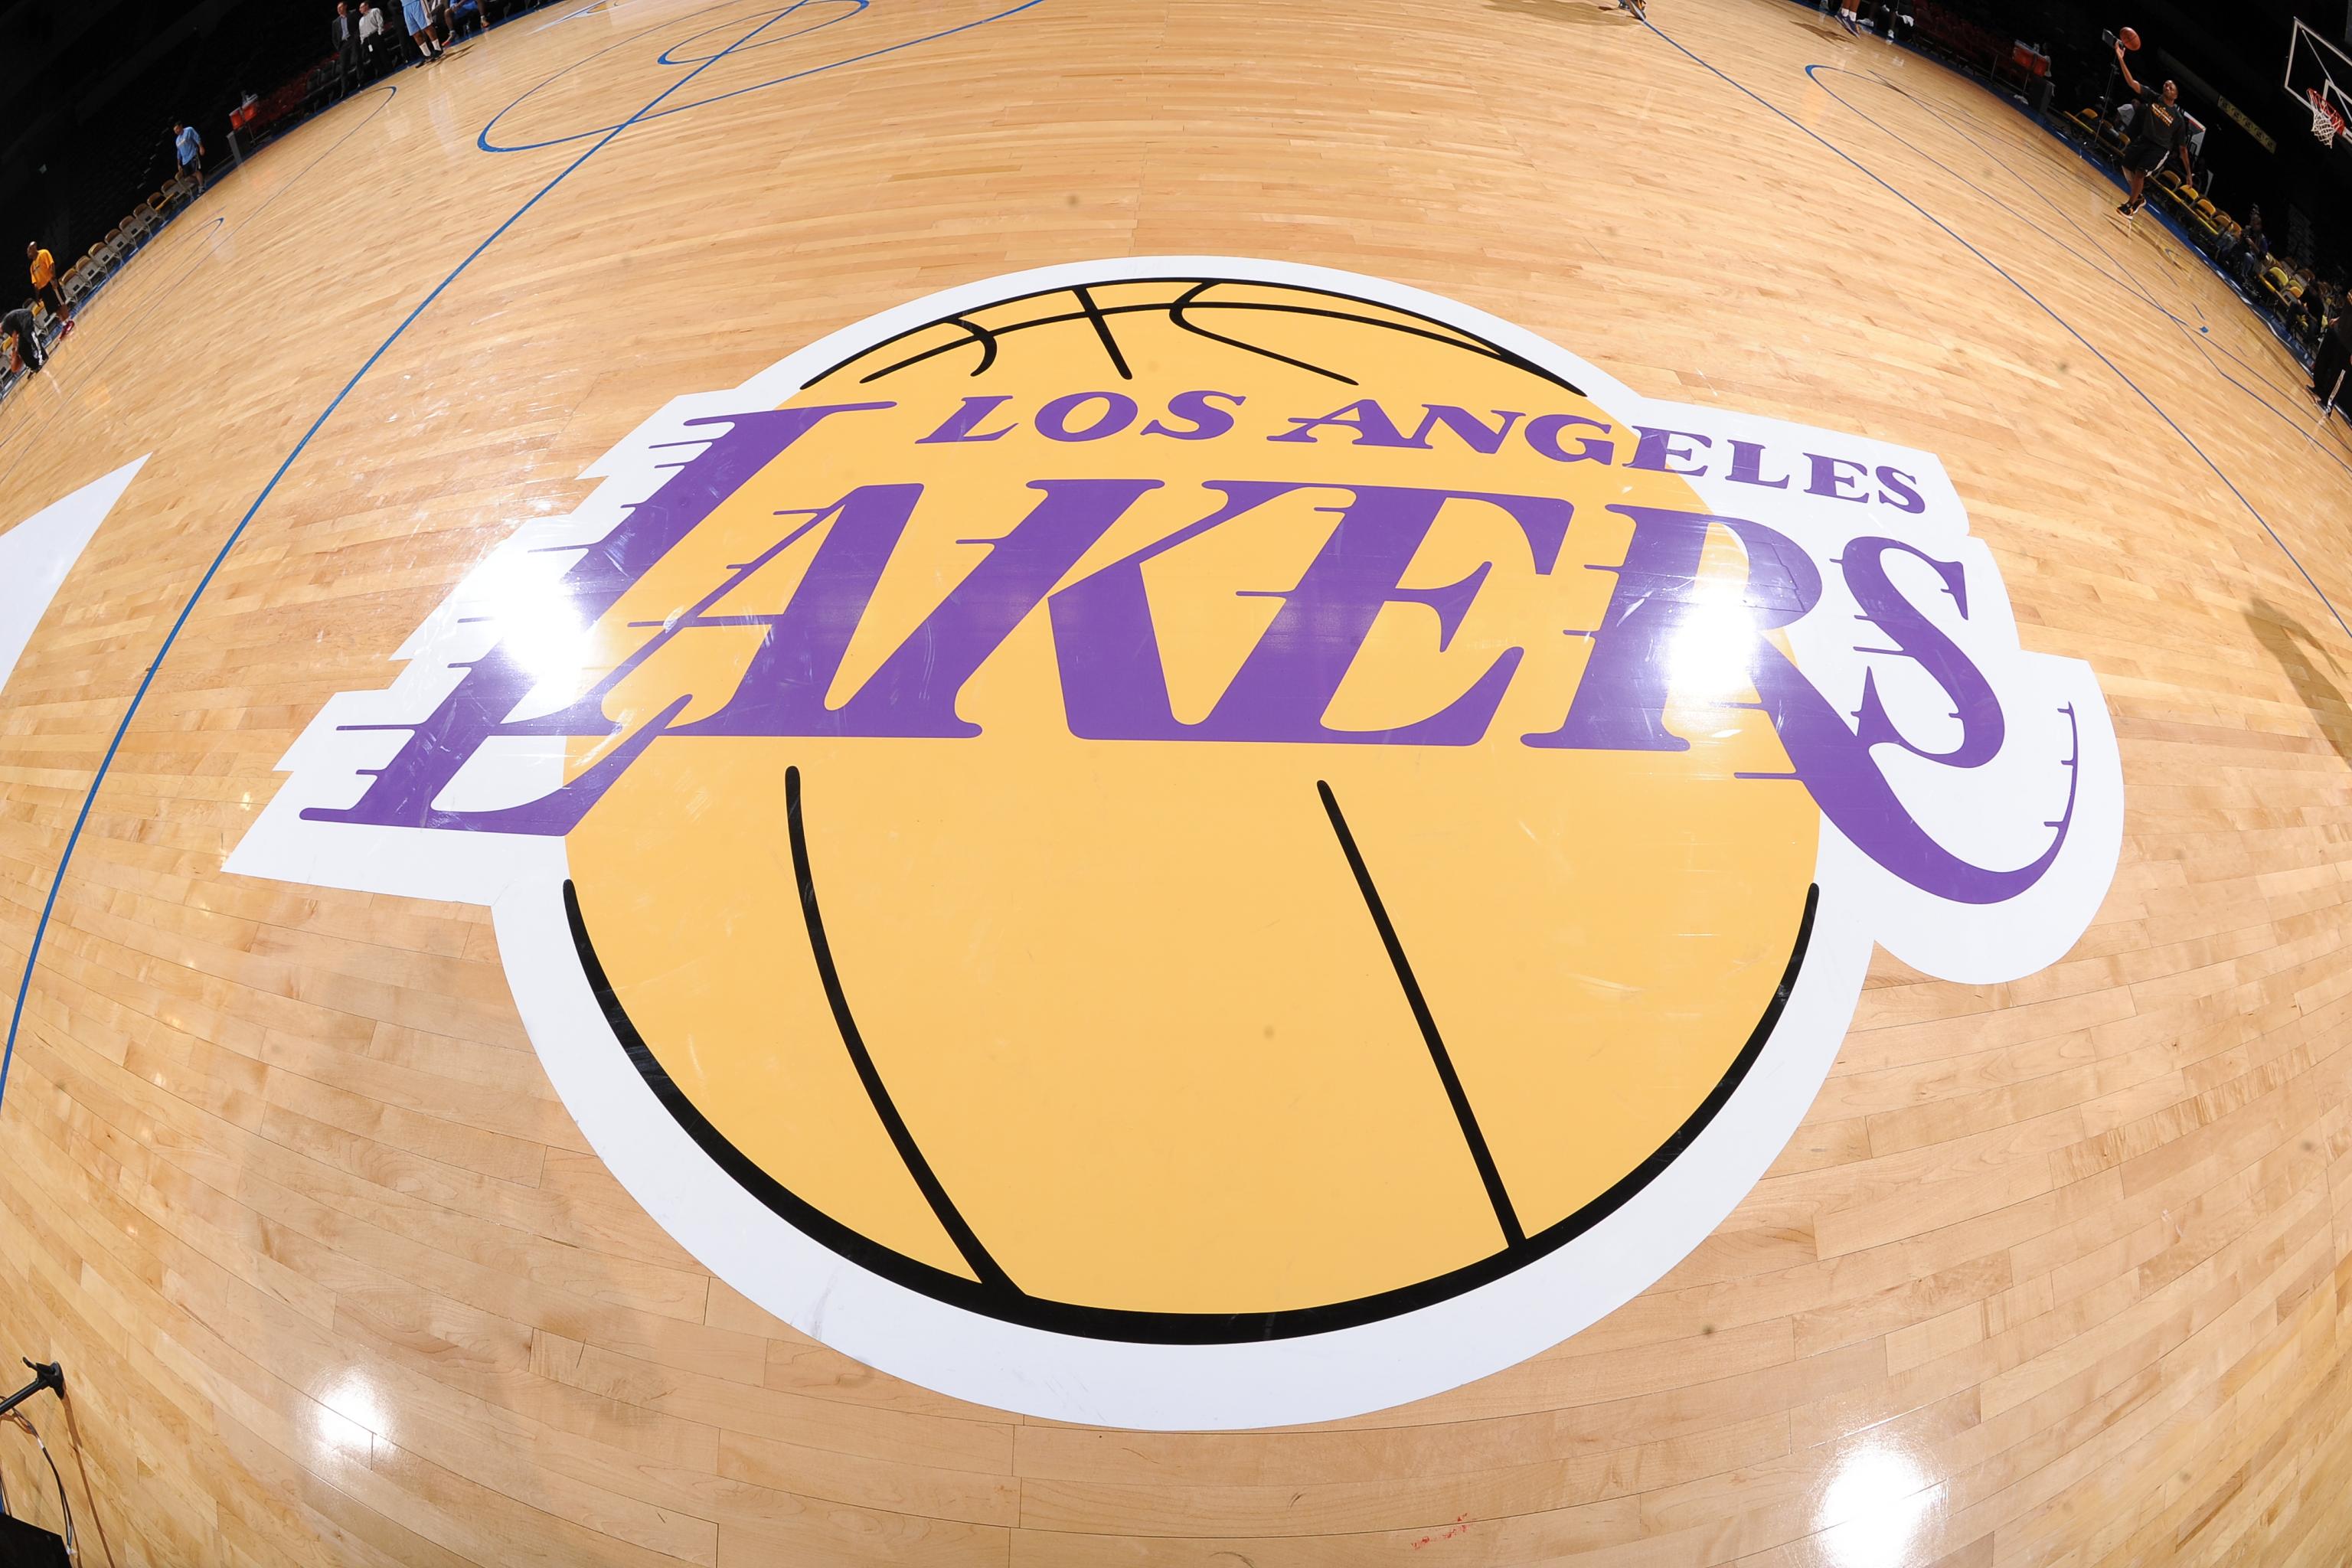 L.A. Lakers received $4.6 million from federal loan program — but